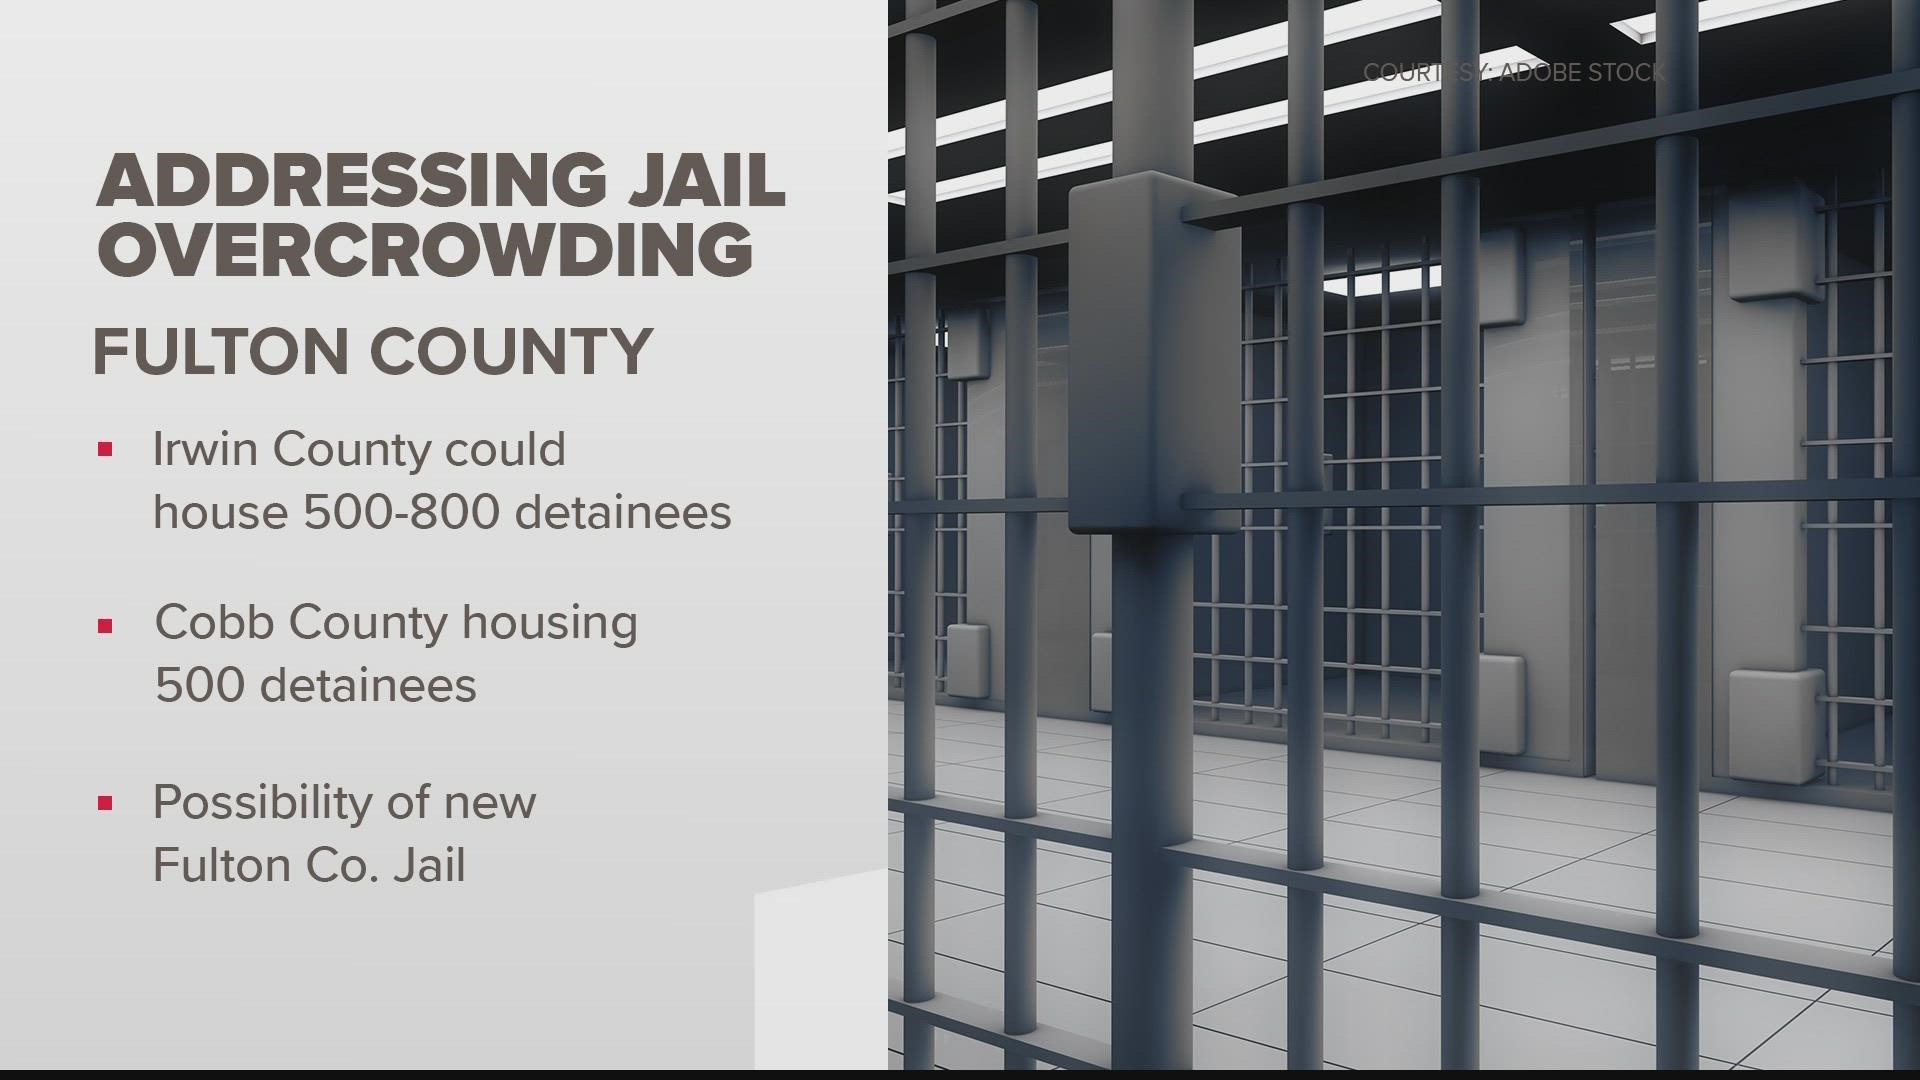 The sheriff said his staff toured a facility in Irwin County that could possibly be used to temporarily house between 500 and 800 Fulton detainees.